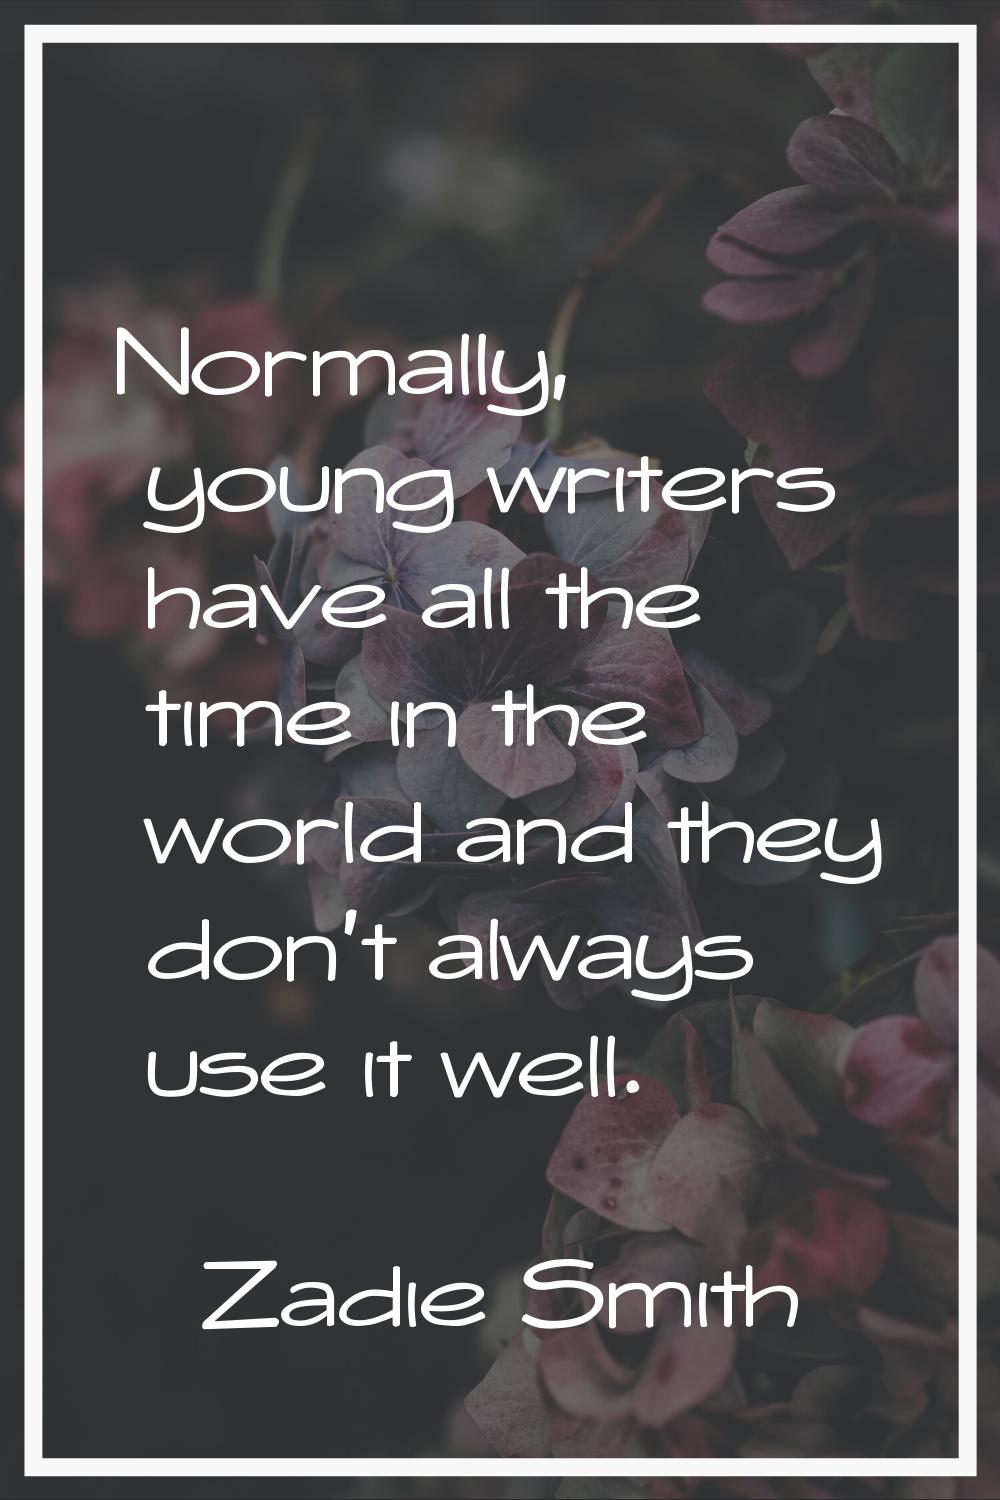 Normally, young writers have all the time in the world and they don't always use it well.